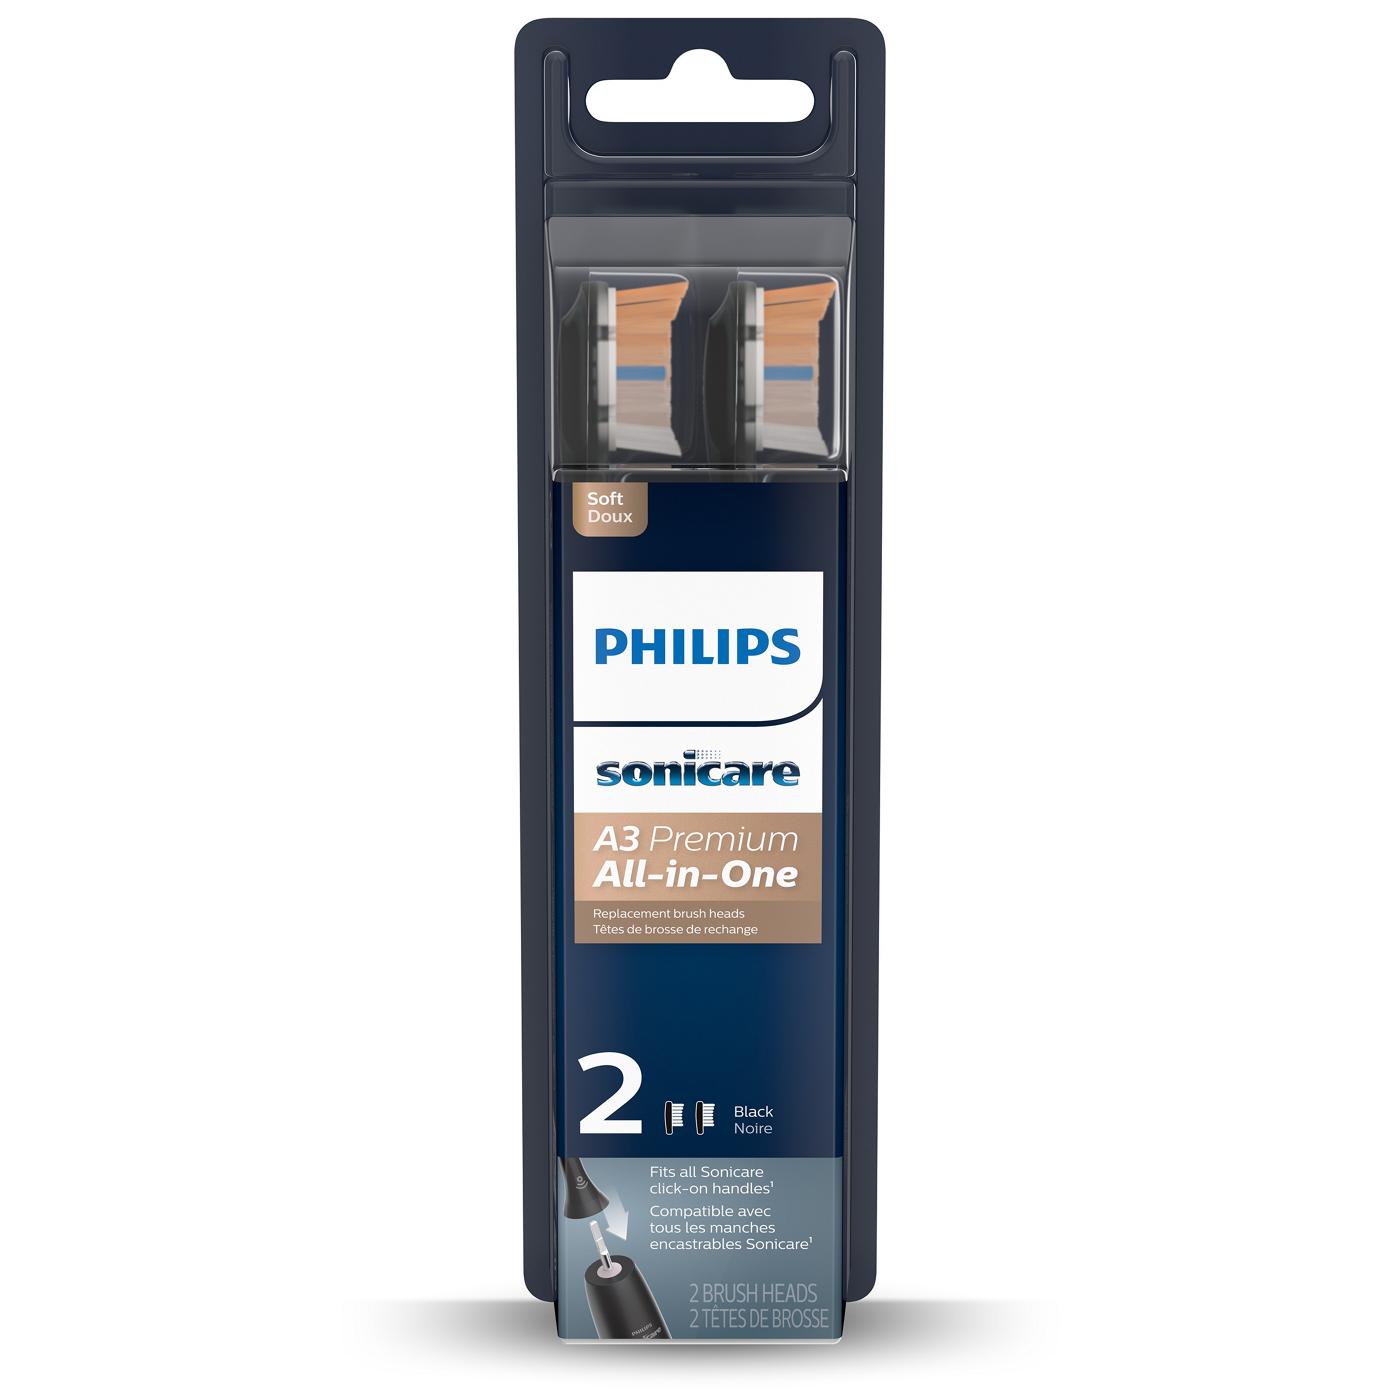 Philips Sonicare A3 Premium All-in-One Replacement Brush Heads; image 1 of 4